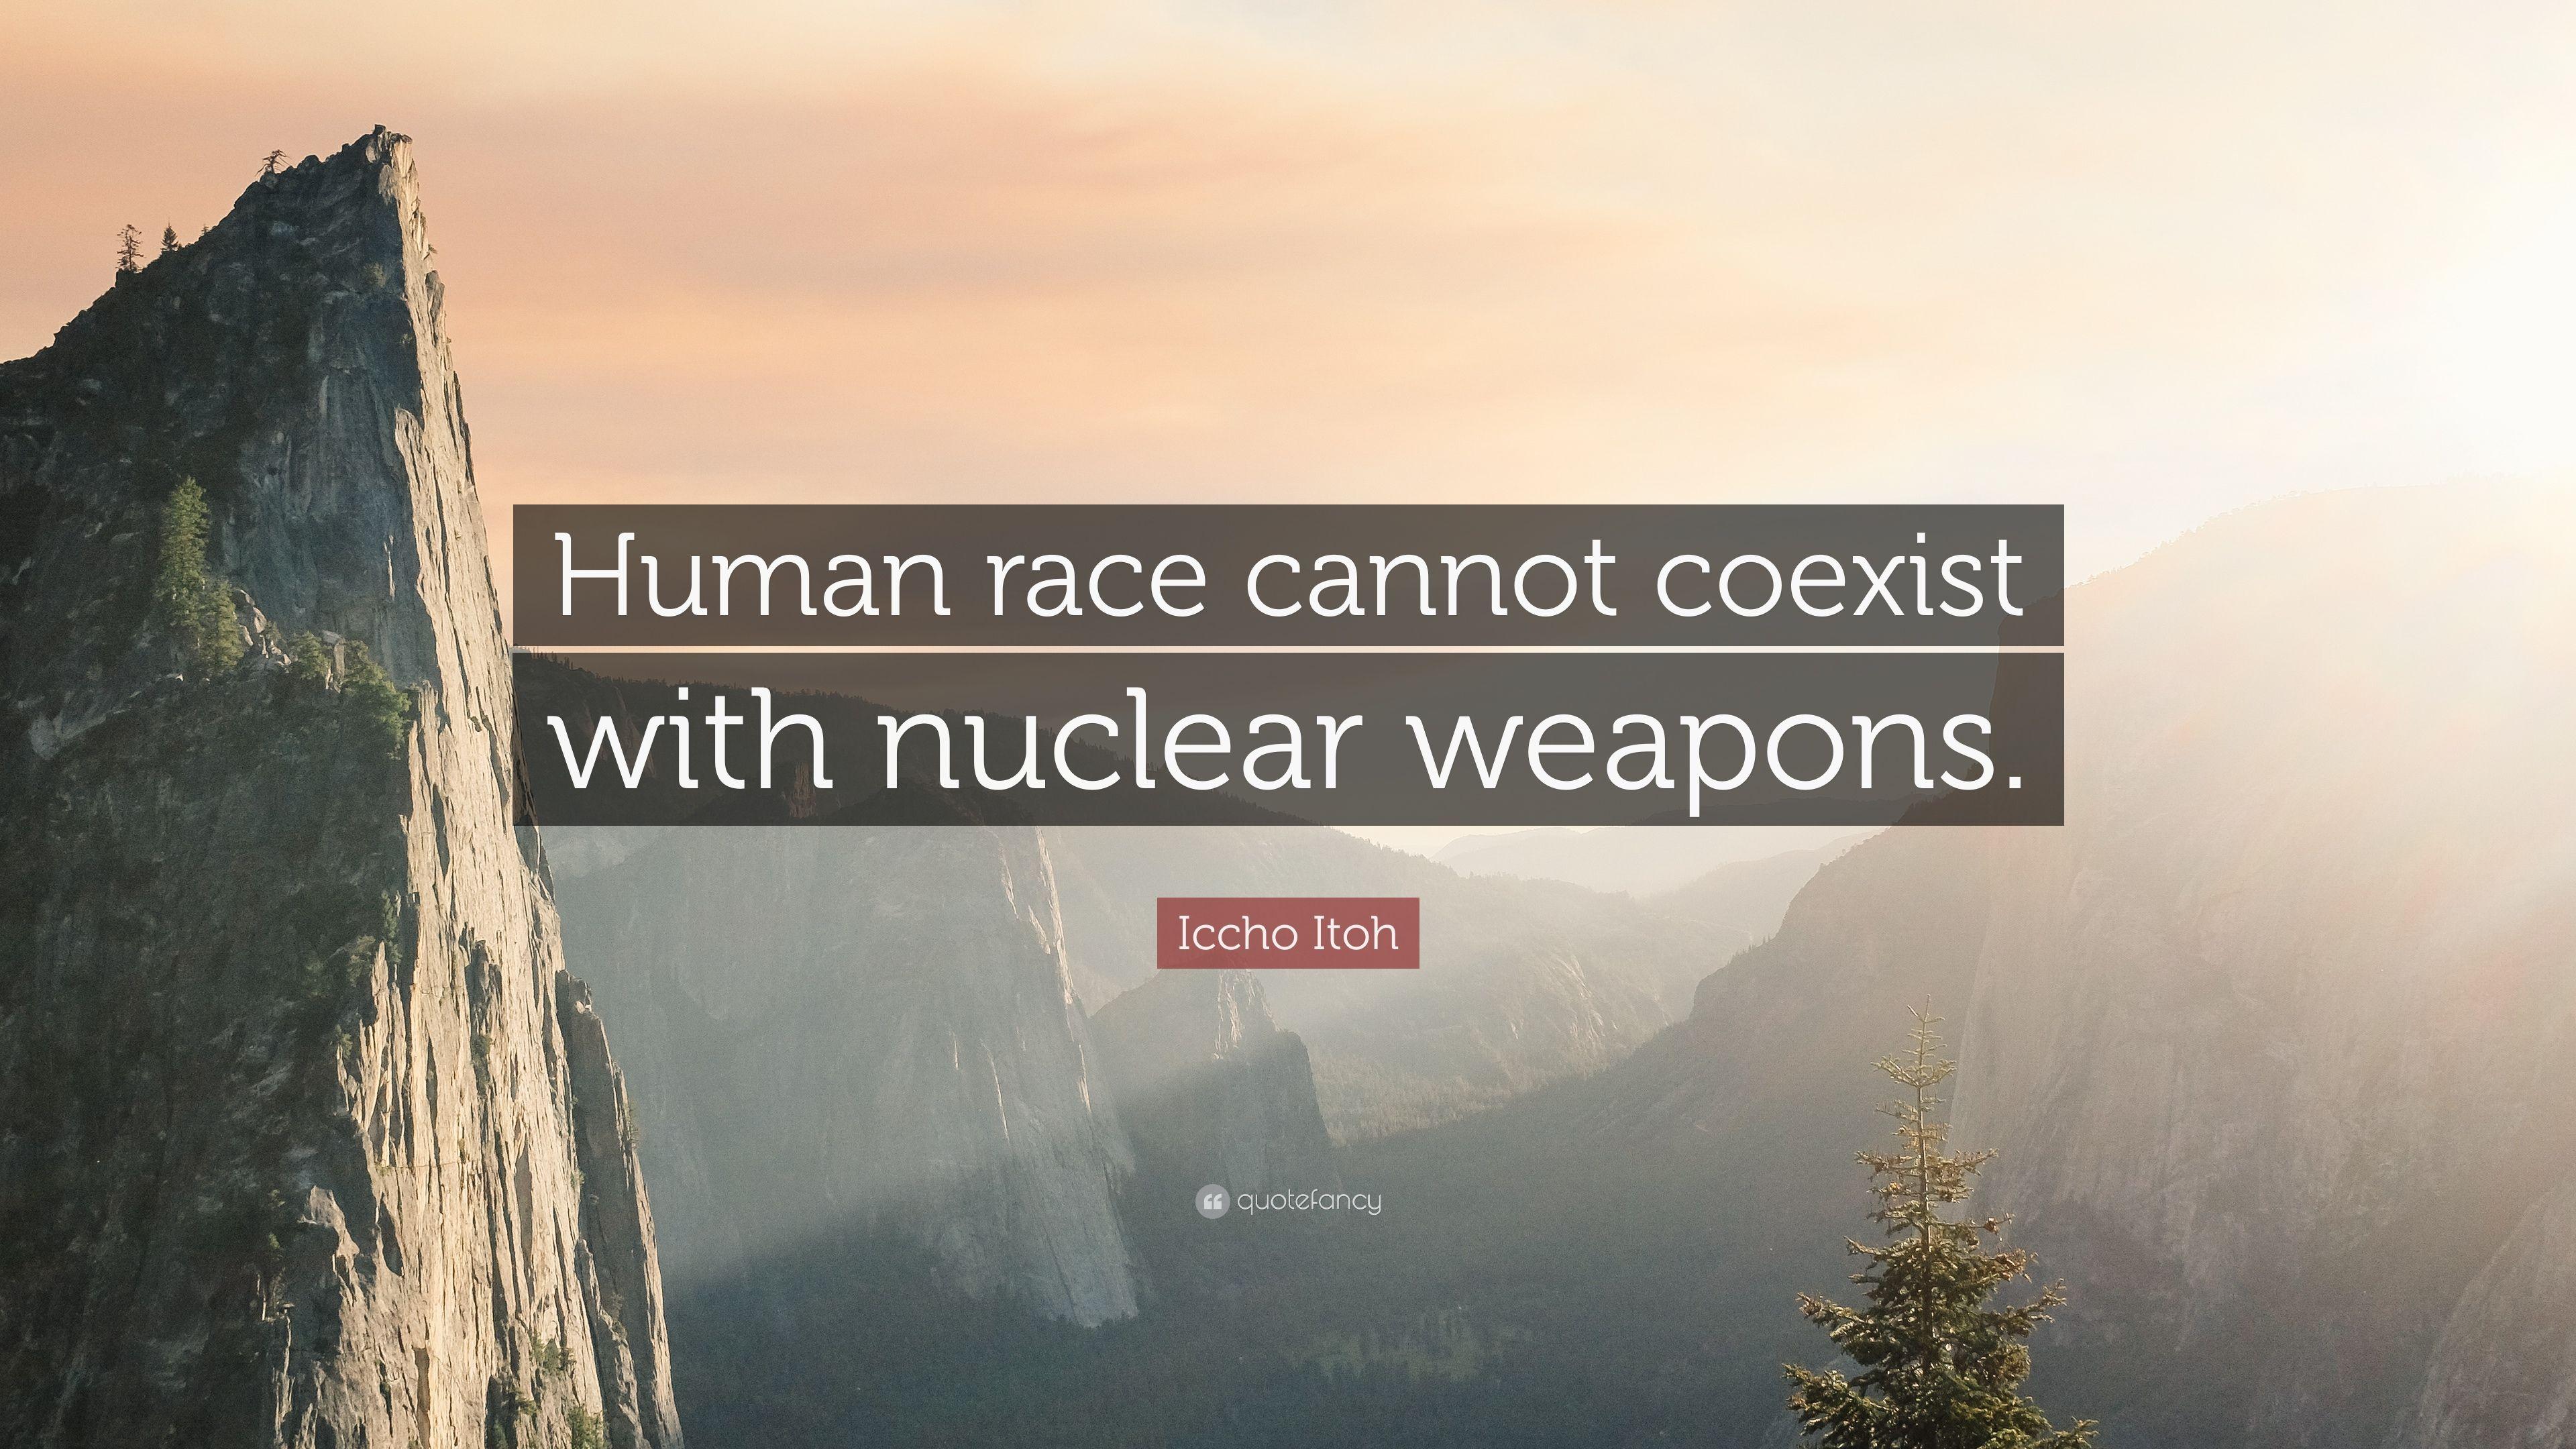 Iccho Itoh Quote: “Human race cannot coexist with nuclear weapons